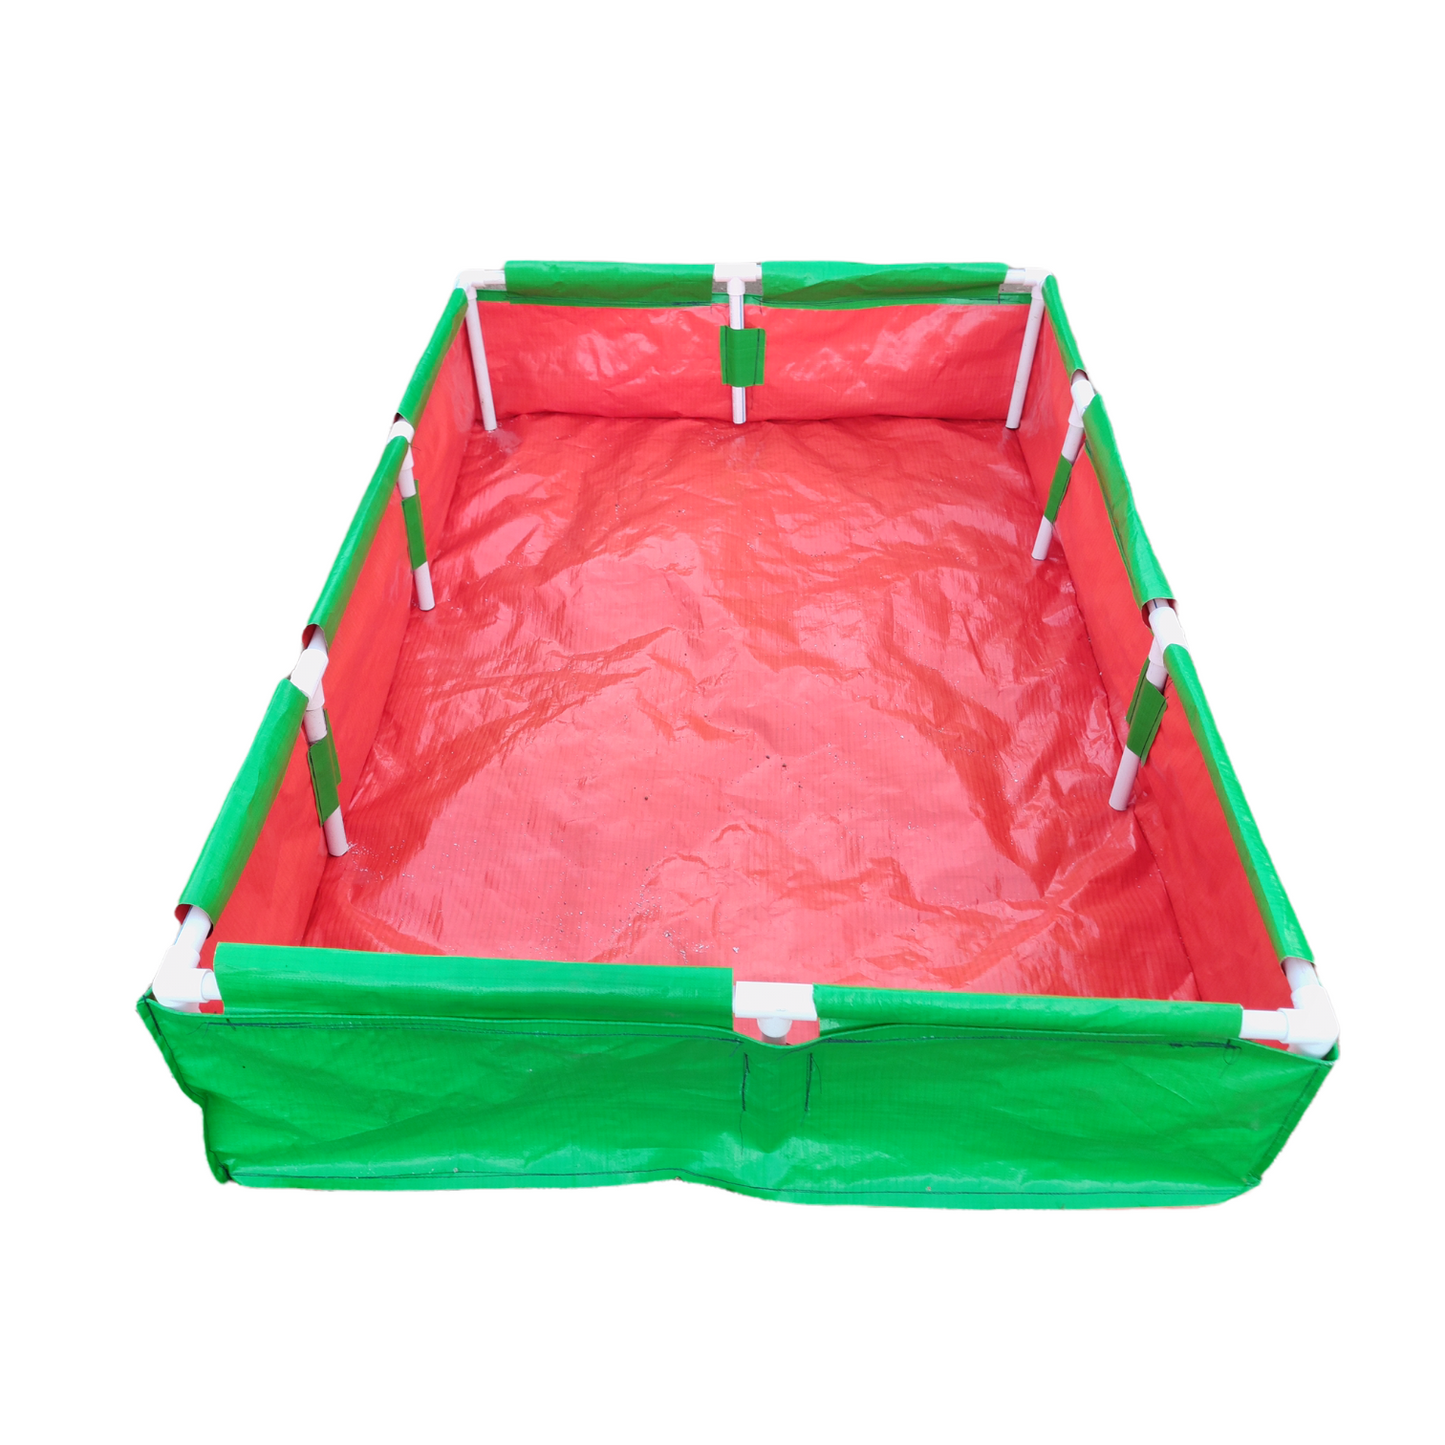 72x48x12 Inches (6x4x1 Ft) - 220 GSM HDPE Rectangular Grow Bag With Supporting PVC Pipes